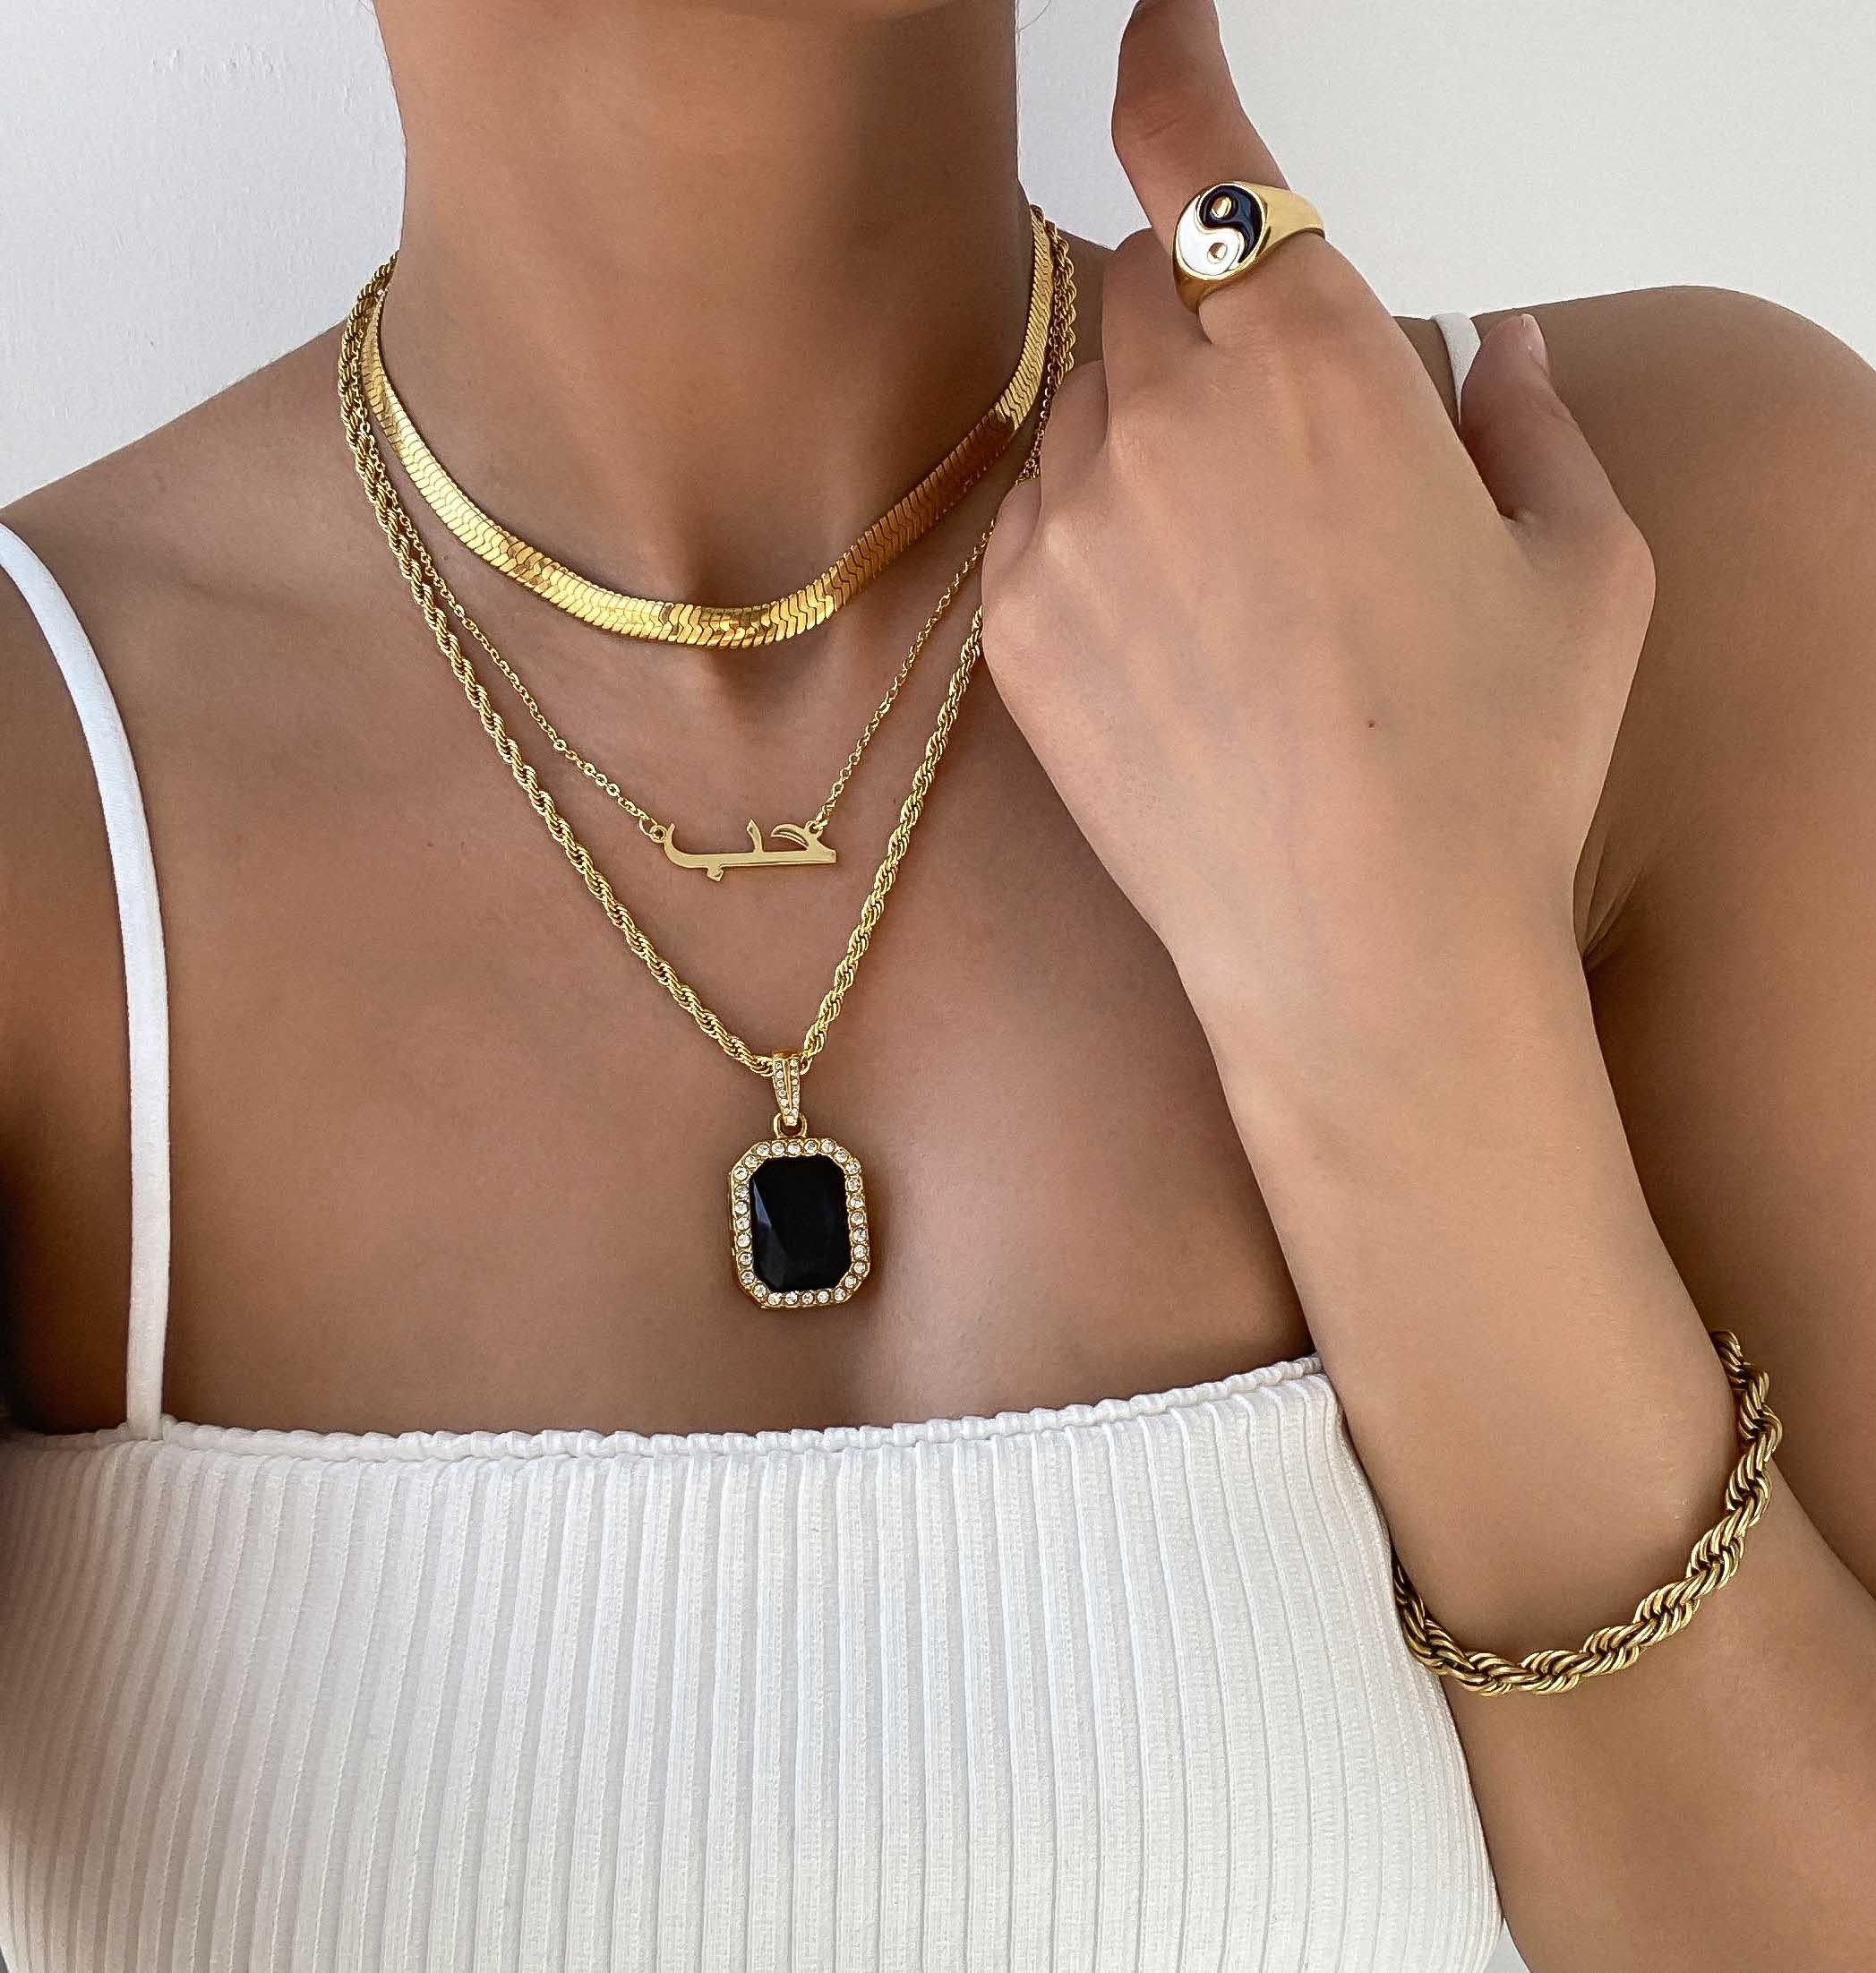 A woman wearing a gold Arabic name necklace layered with an Onyx pendant necklace and Herringbone chain. 